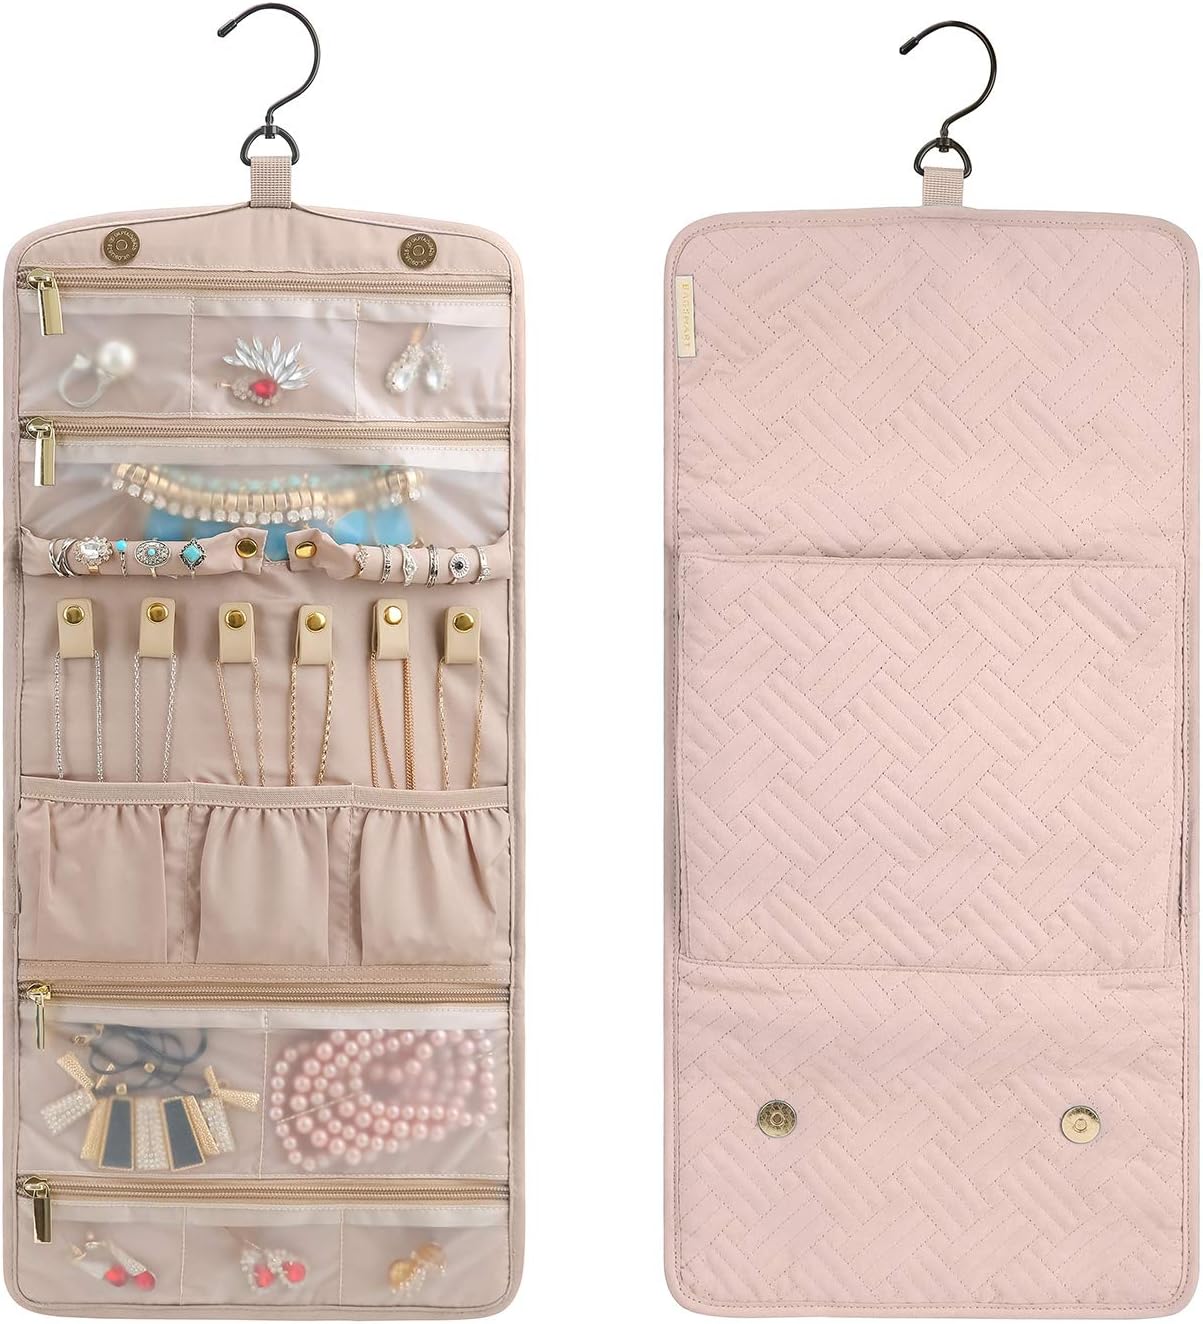 Blushbees® Foldable Travel Hanging Jewelry Organizer - Soft Pink